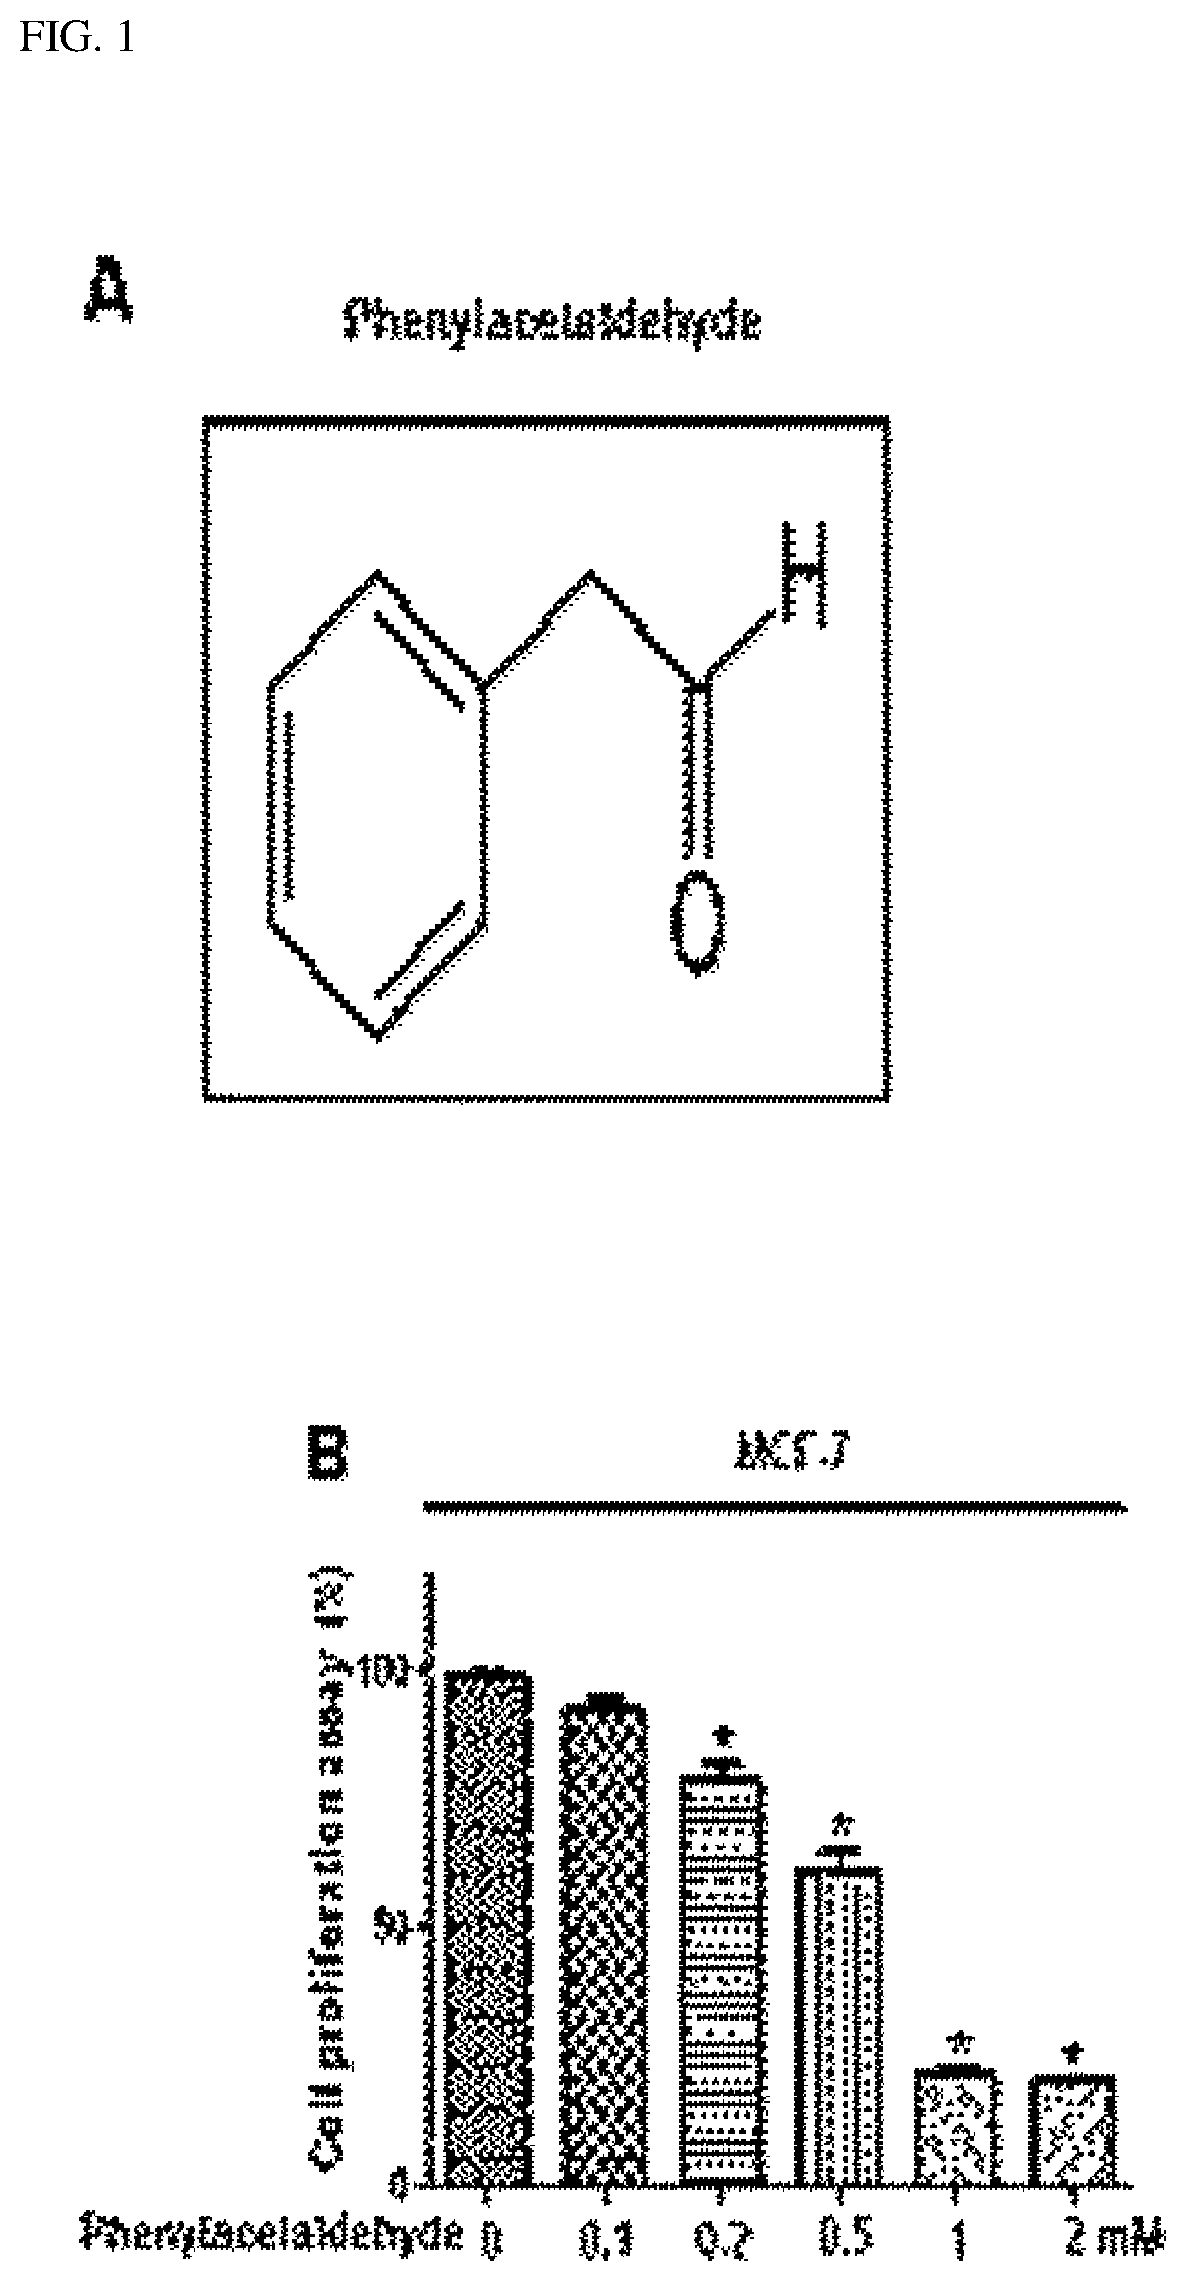 Composition for inhibiting growth of breast cancer stem cells containing phenylacetaldehyde